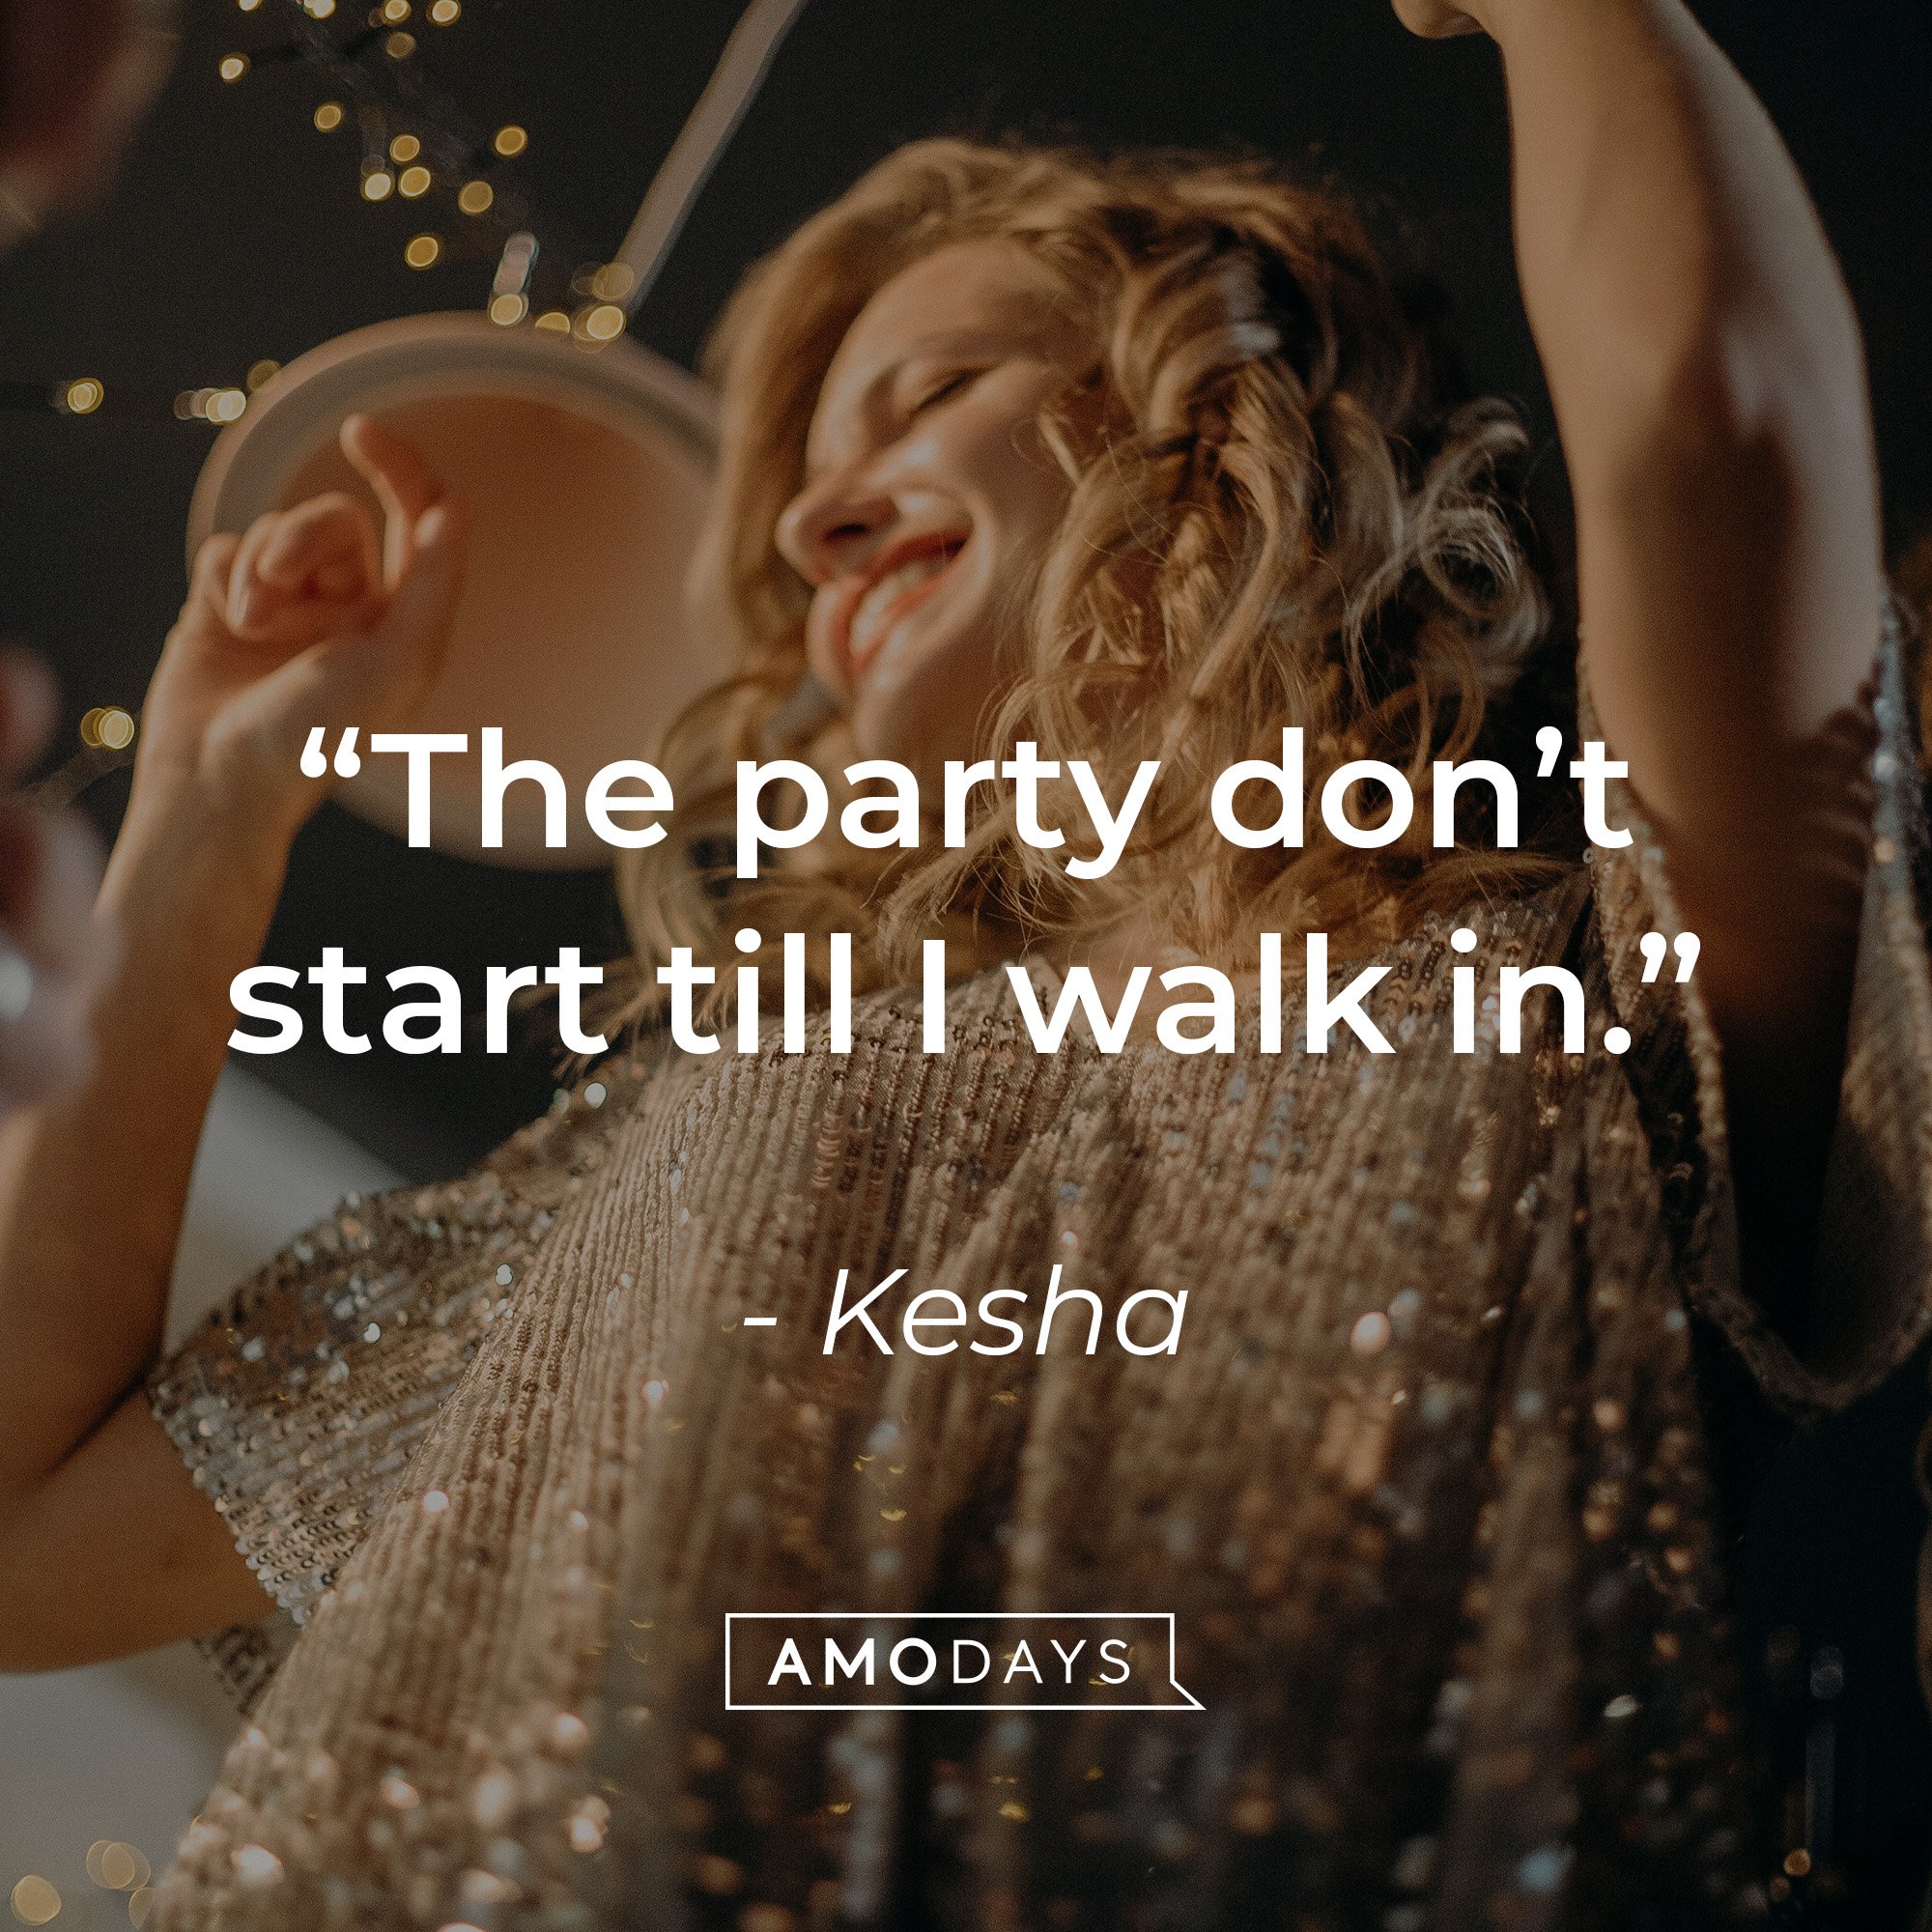 Kesha's quote: "The party don't start till I walk in." | Image: AmoDays 